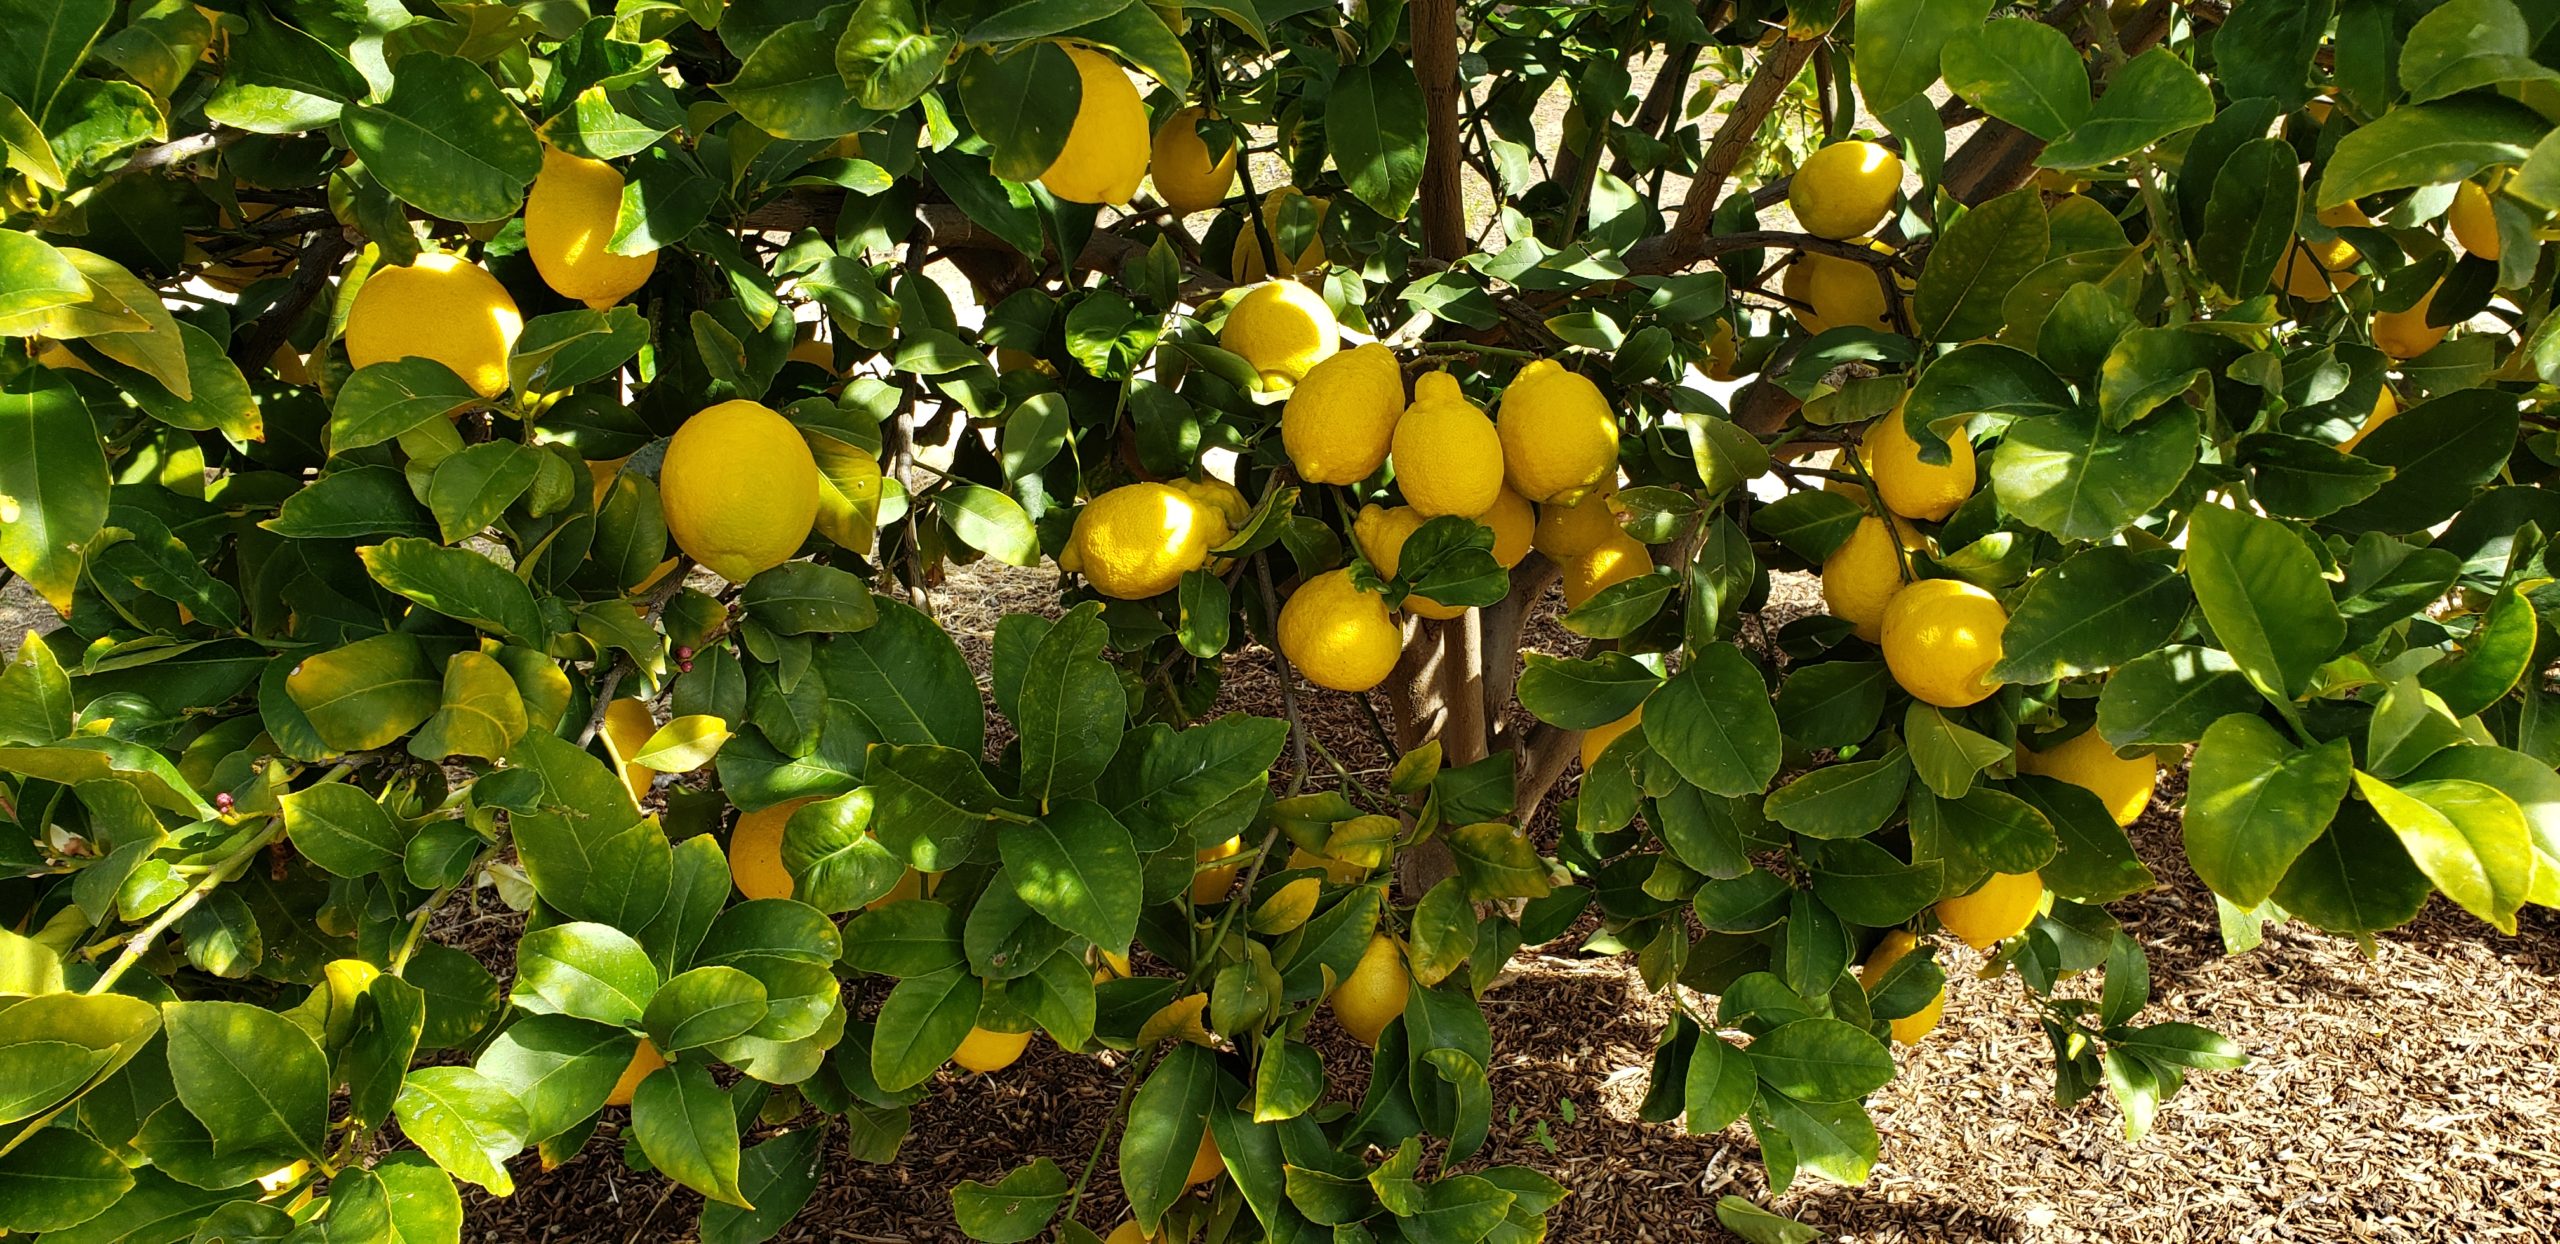 Great Garden Products - Lemons 20190212_120543